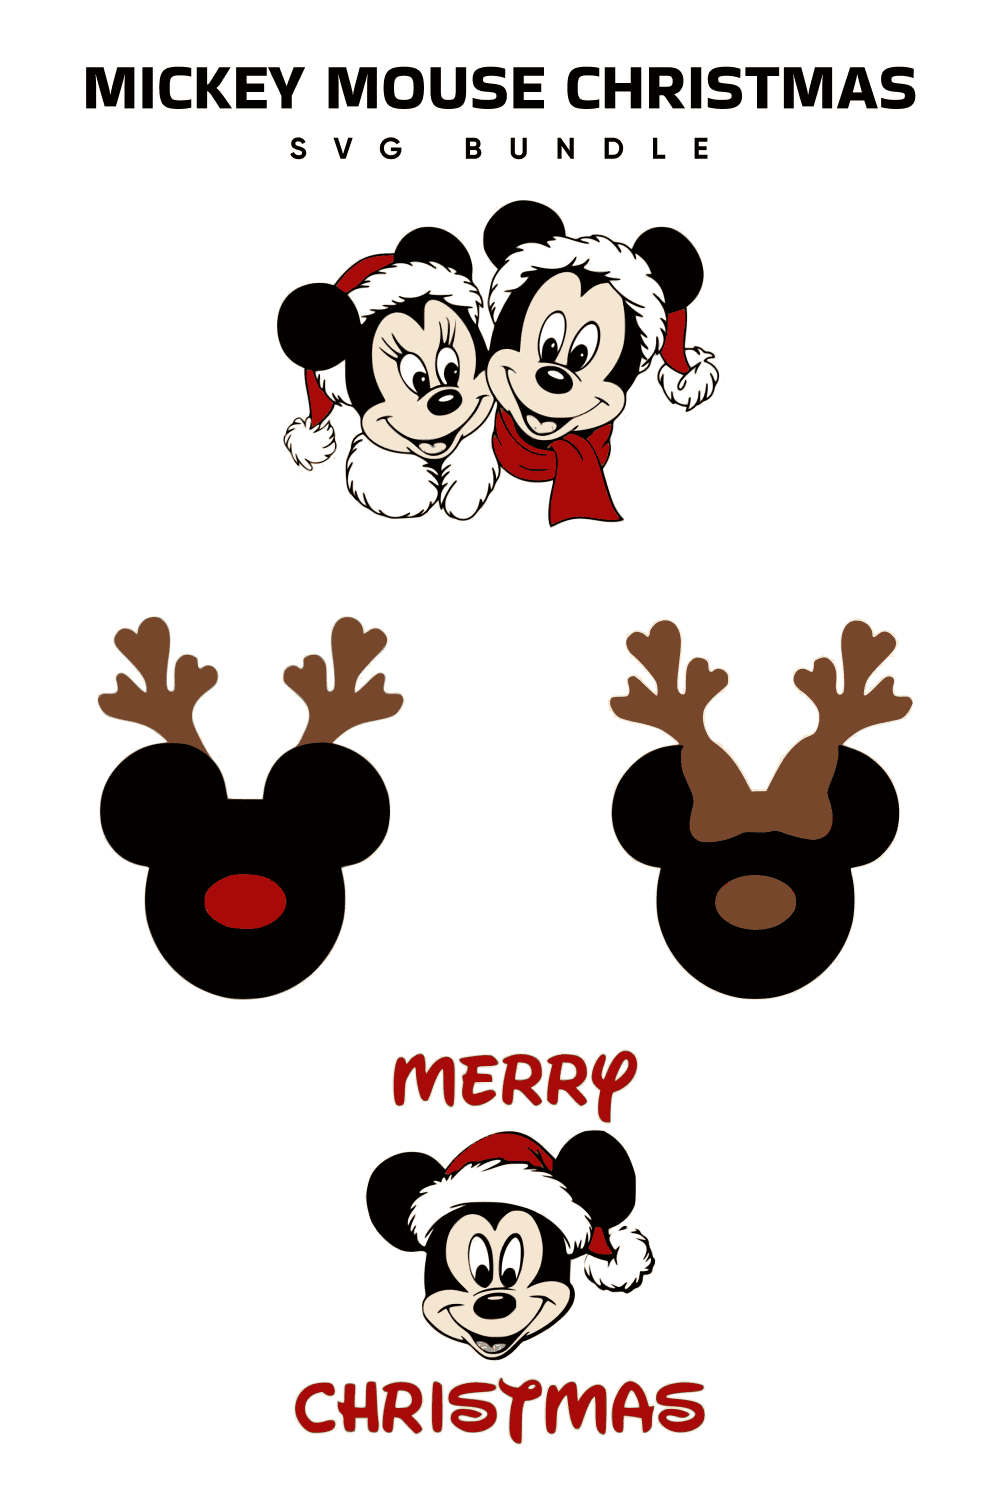 Collection of gorgeous Mickey Mouse christmas images.